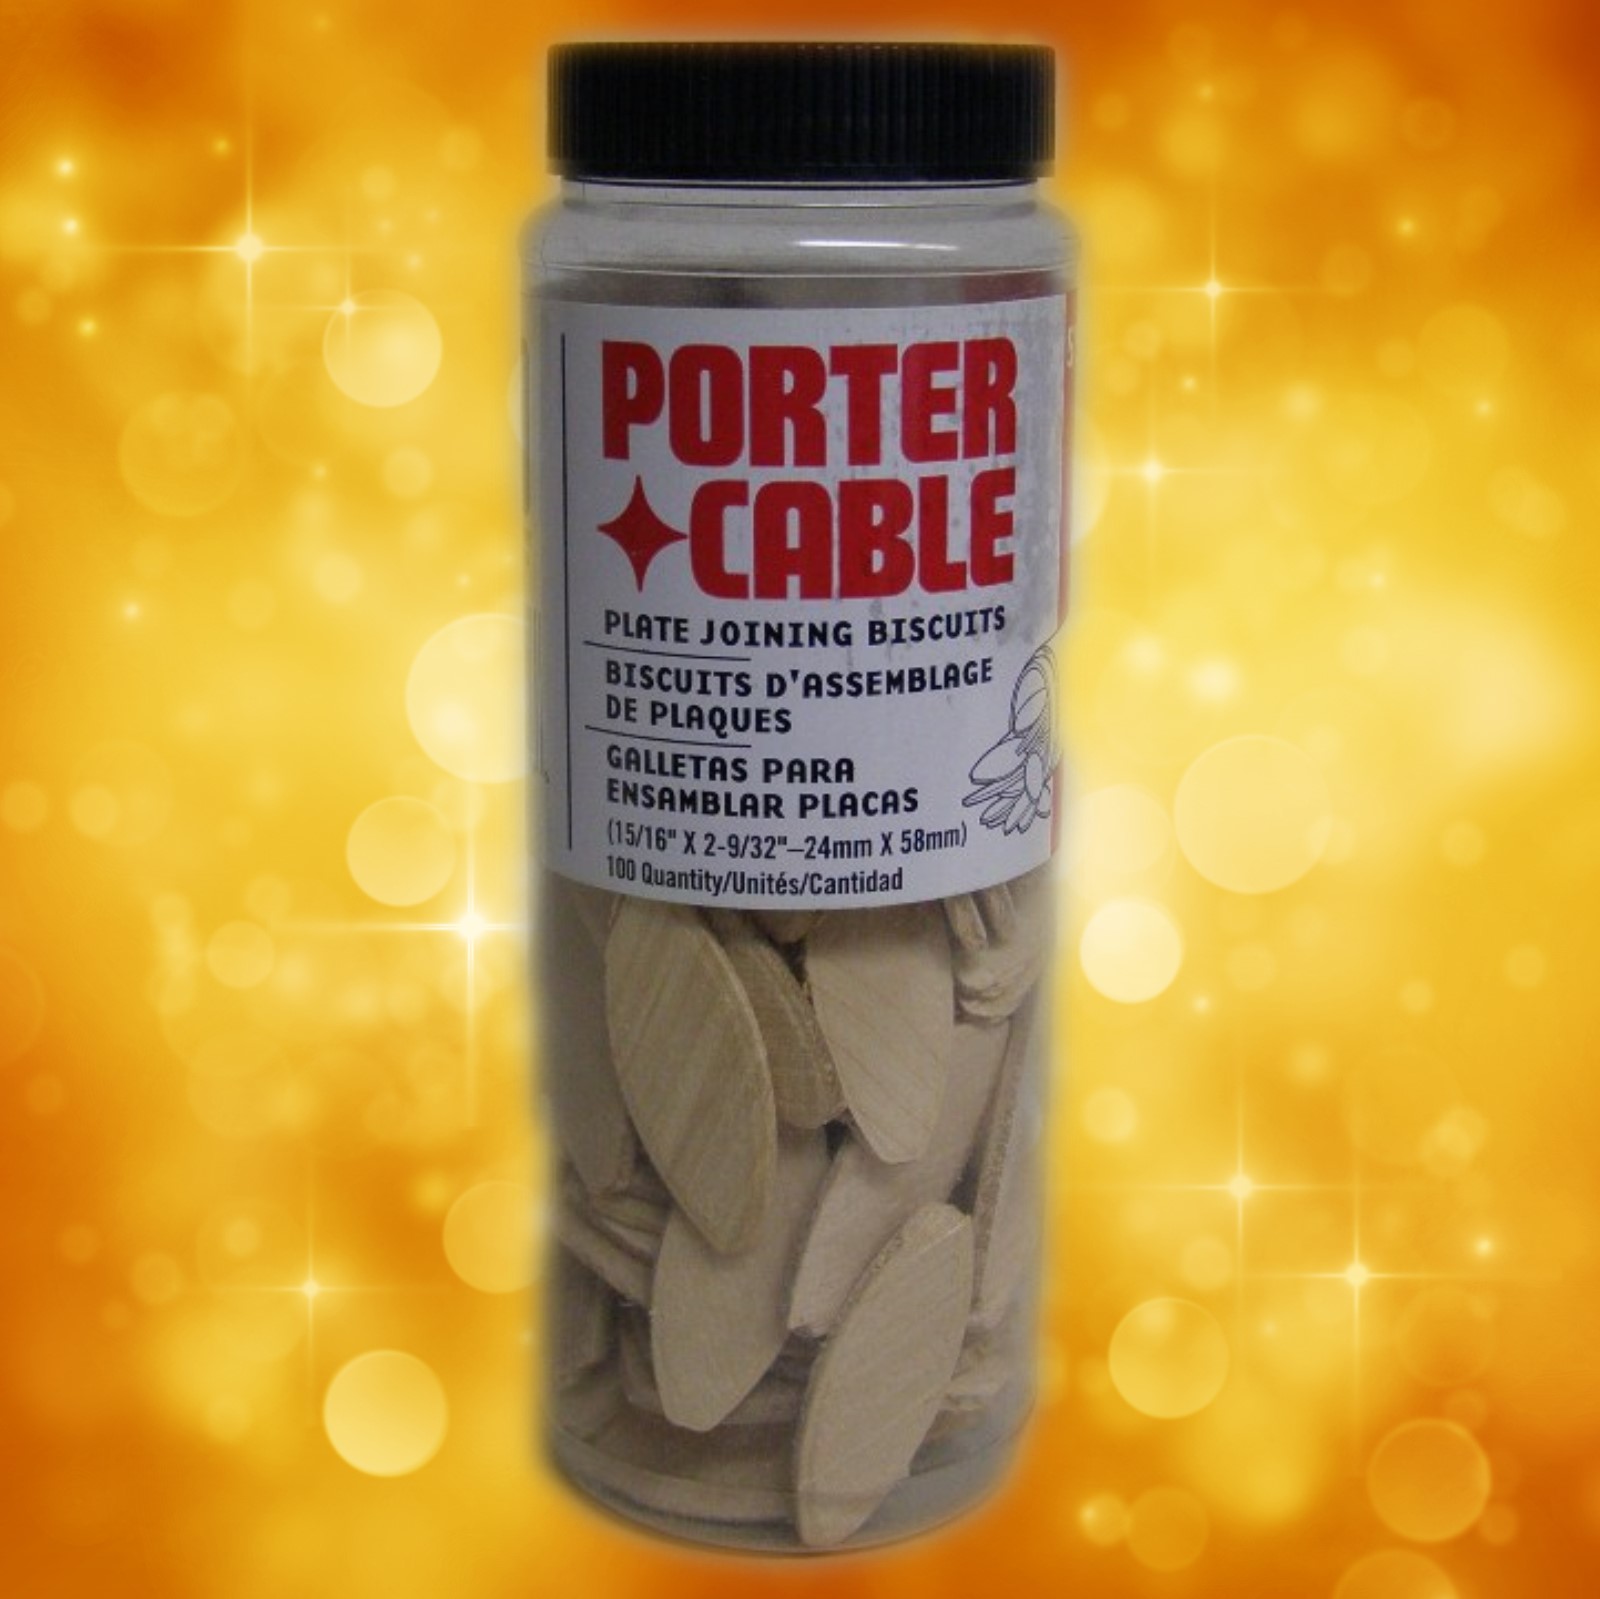 Porter Cable Biscuits 5562 "20" (24mm x 58mm) 100 Count 5562